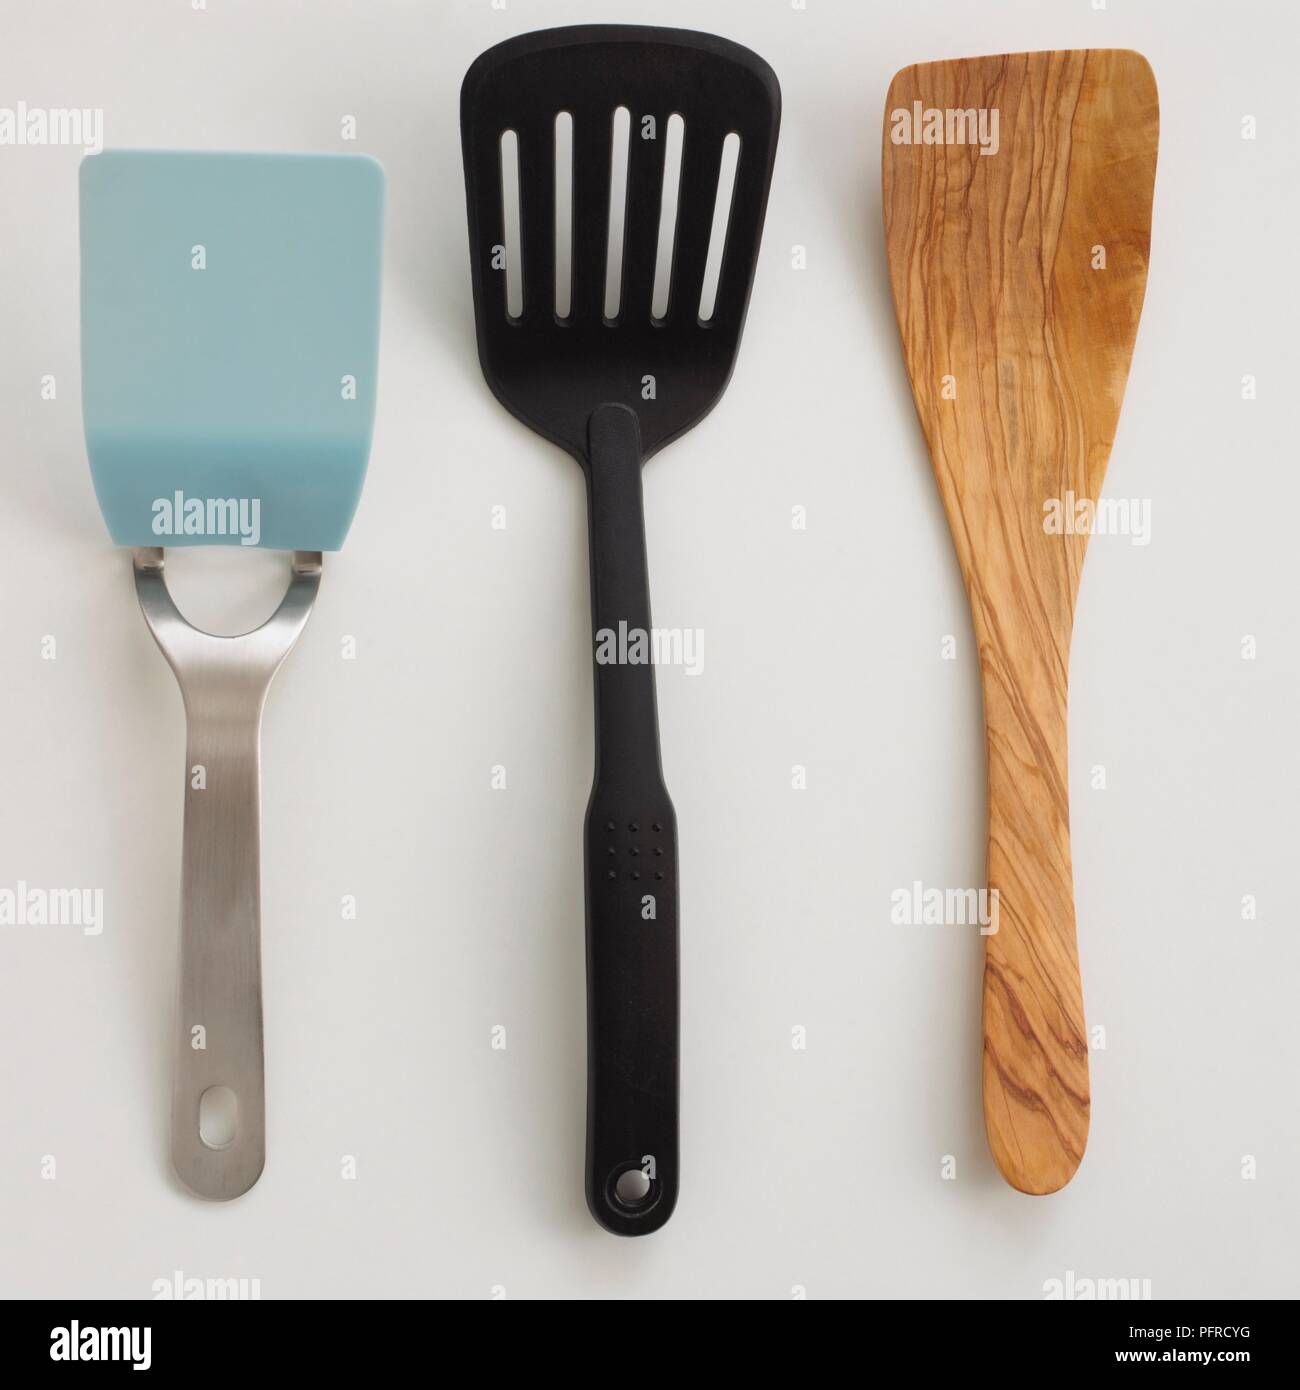 Download Plastic And Wooden Spatulas Stock Photo Alamy Yellowimages Mockups